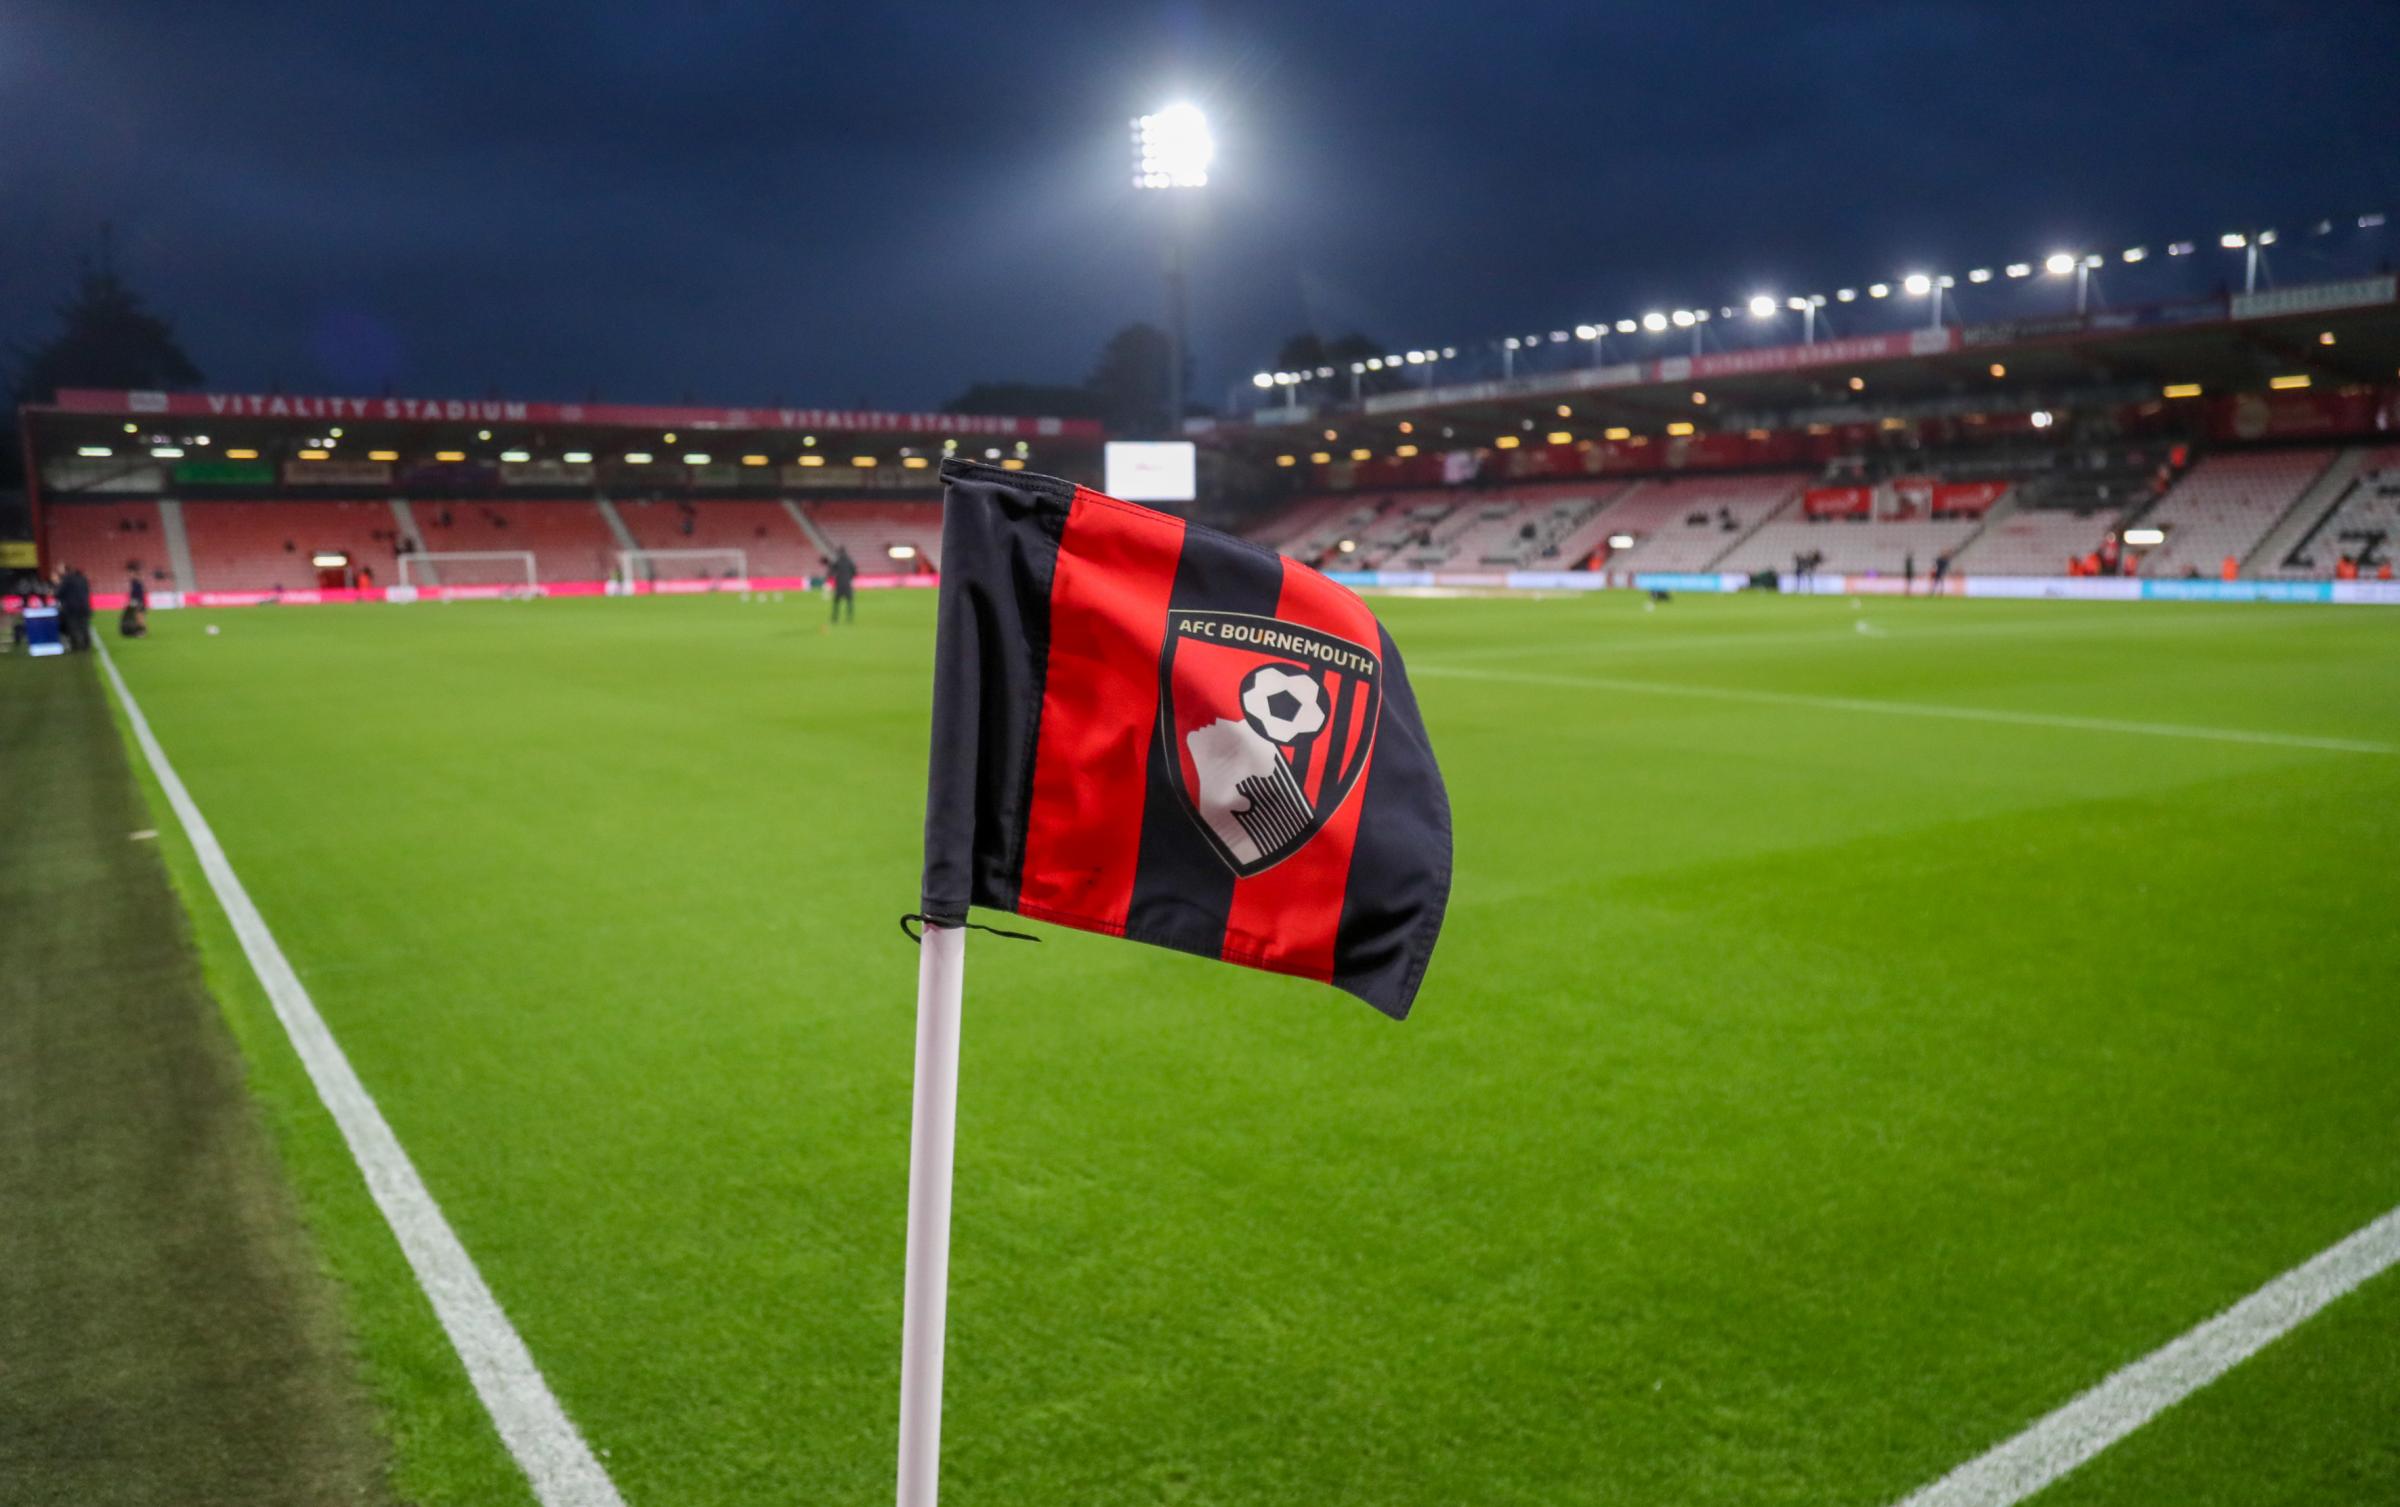 AFC Bournemouth condemns away supporters' behaviour